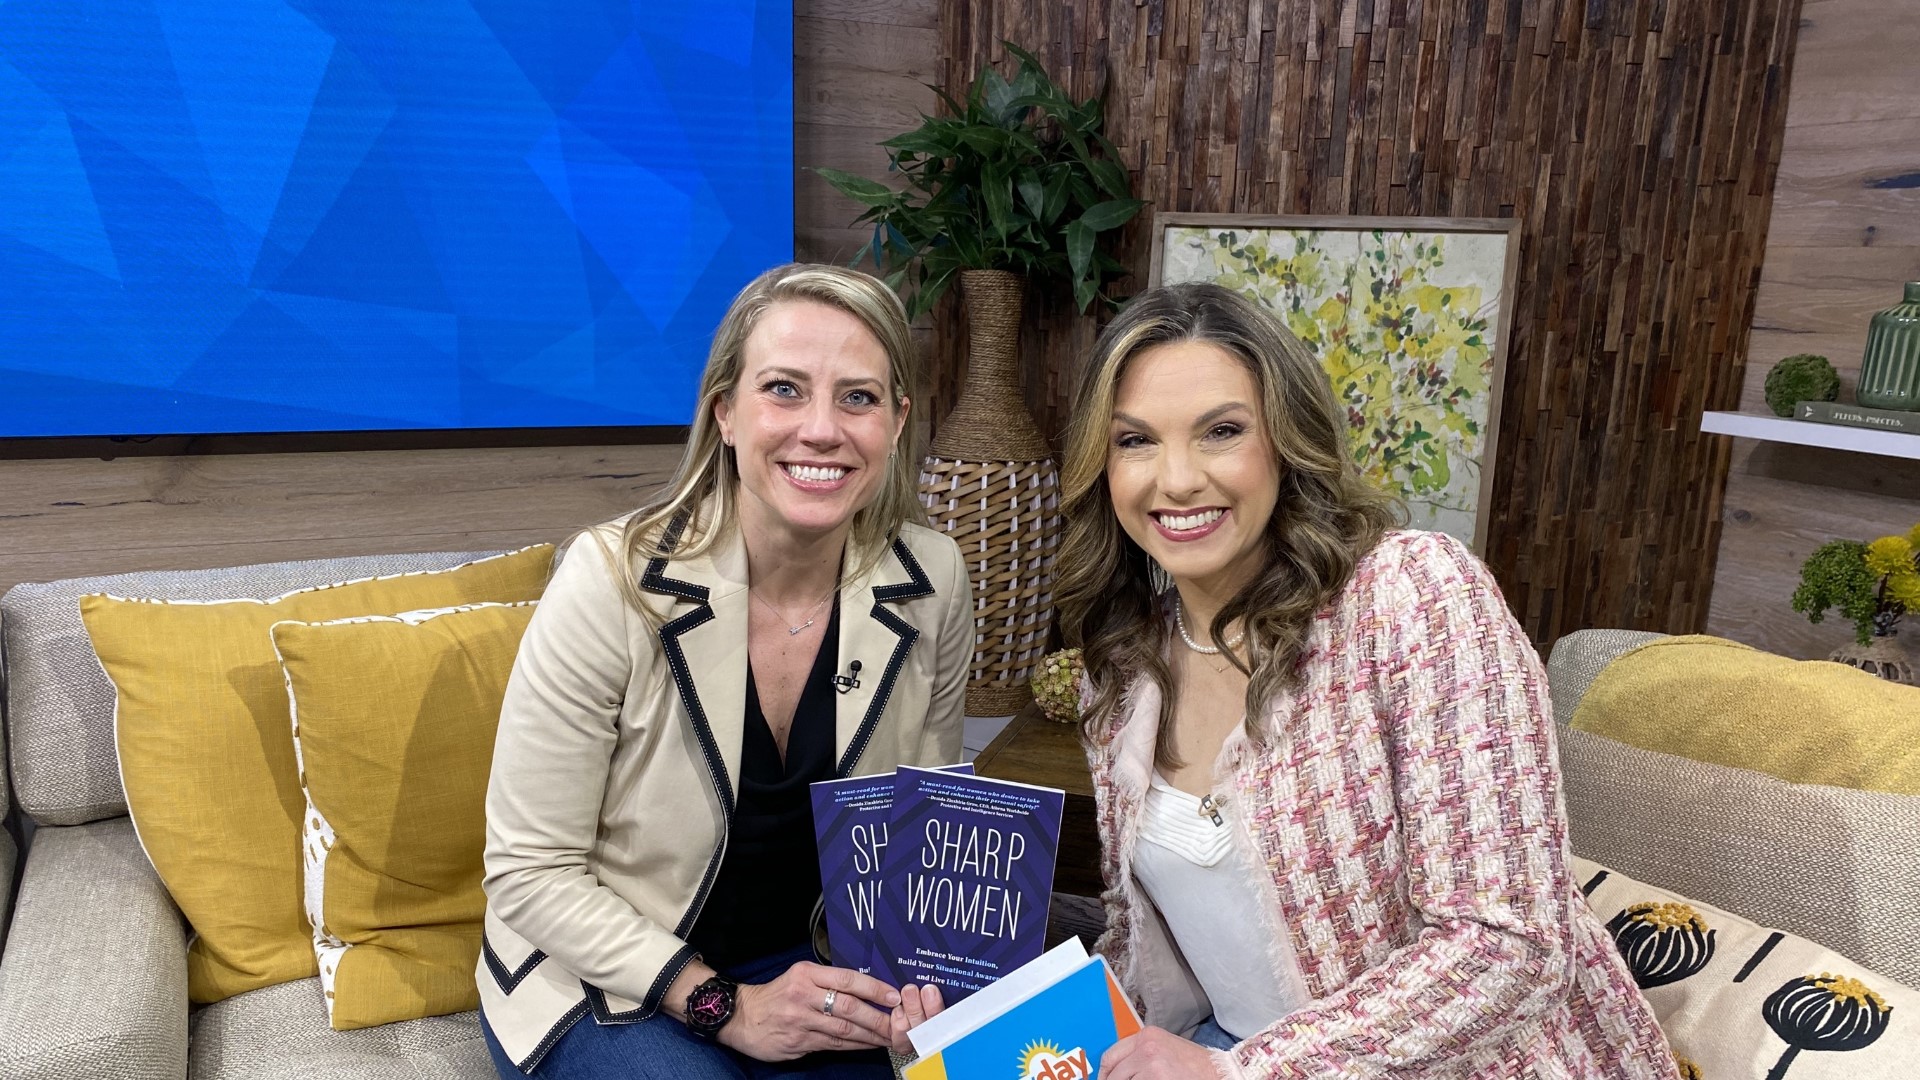 Kelly Sayre, safety expert and author of "Smart Women,"  said women need to trust their intuition and sharpen their natural skills.